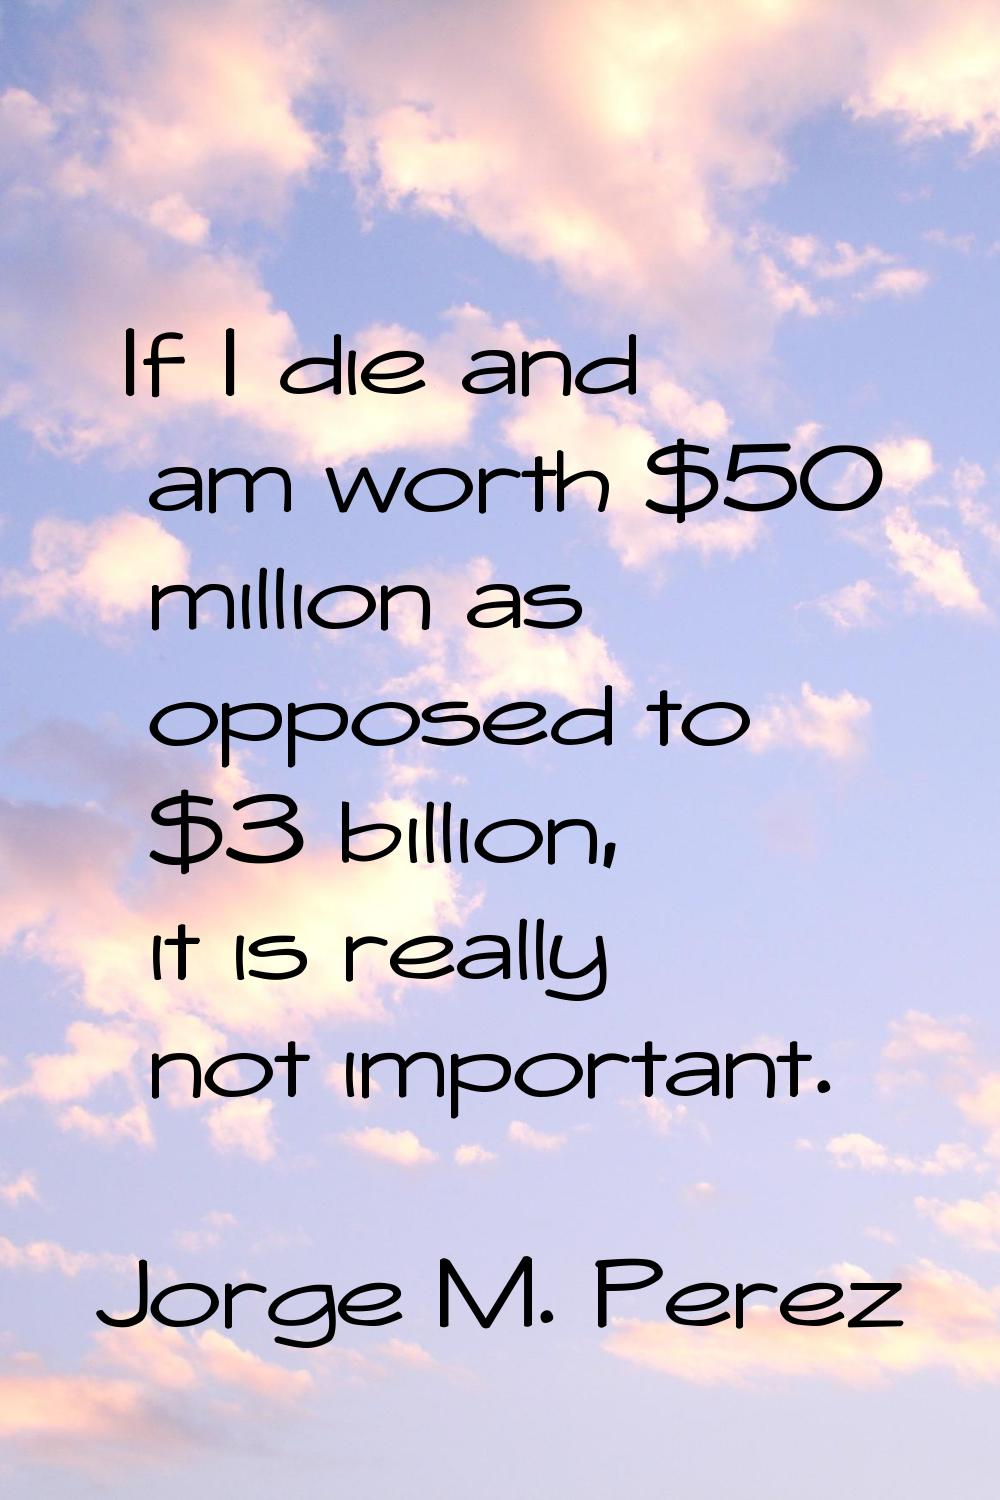 If I die and am worth $50 million as opposed to $3 billion, it is really not important.